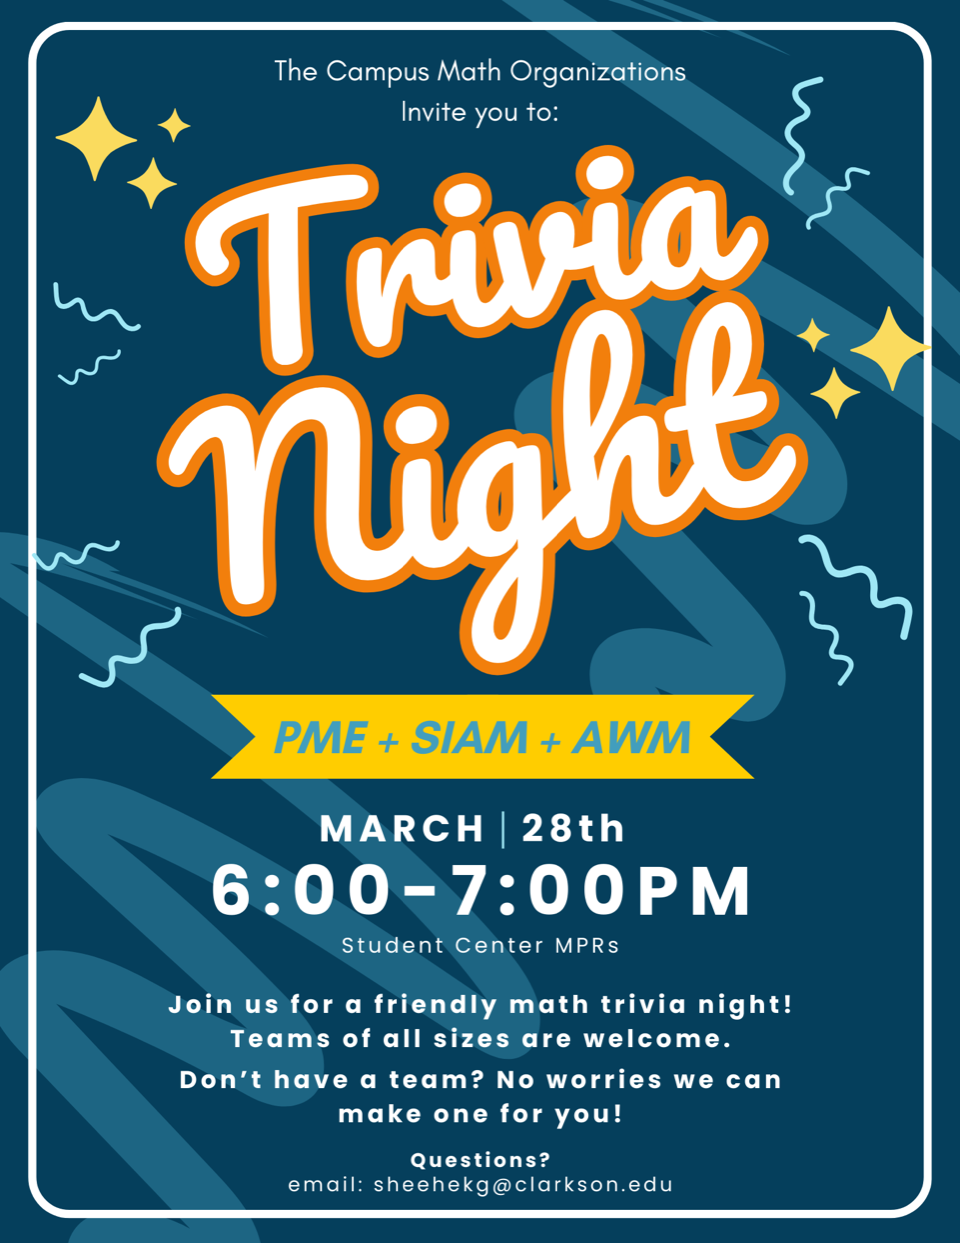 Festive blue flyer with sparkles and confetti and text describing the details of the event. Flyer Text: “The Campus Math Organizations Invite you to: Trivia Night, PME + SIAM + AWM, March 28th, 6:00pm - 7:00pm, Student Center MPRs, Join us for a friendly math trivia night! Teams of all size are welcome. Don’t have a team? No worries we can make one for you! Questions? email: sheehekg@clarkson.edu"